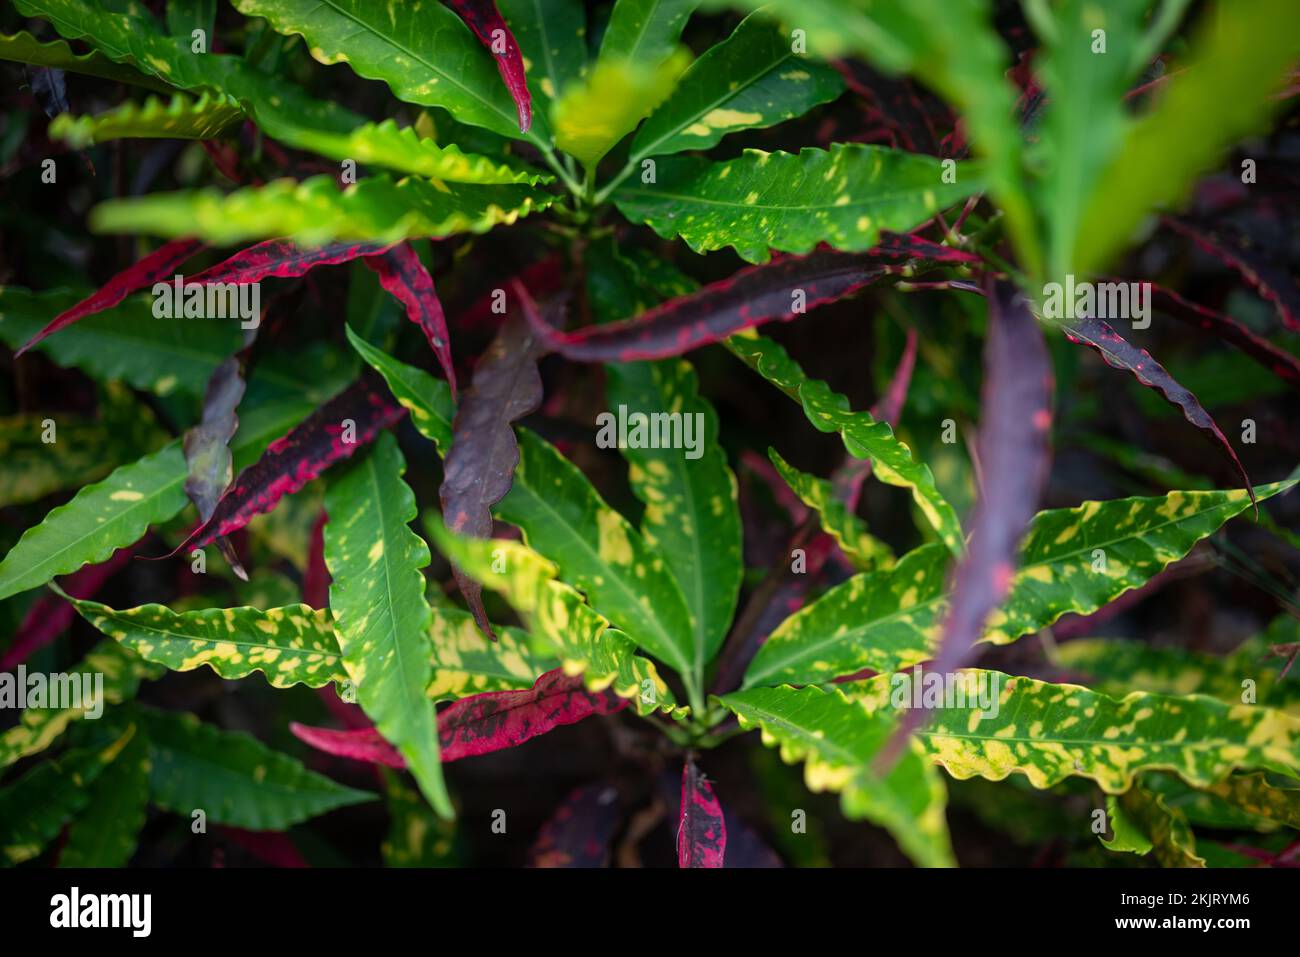 Leaves background of variegated croton with yellow and purple spots Stock Photo